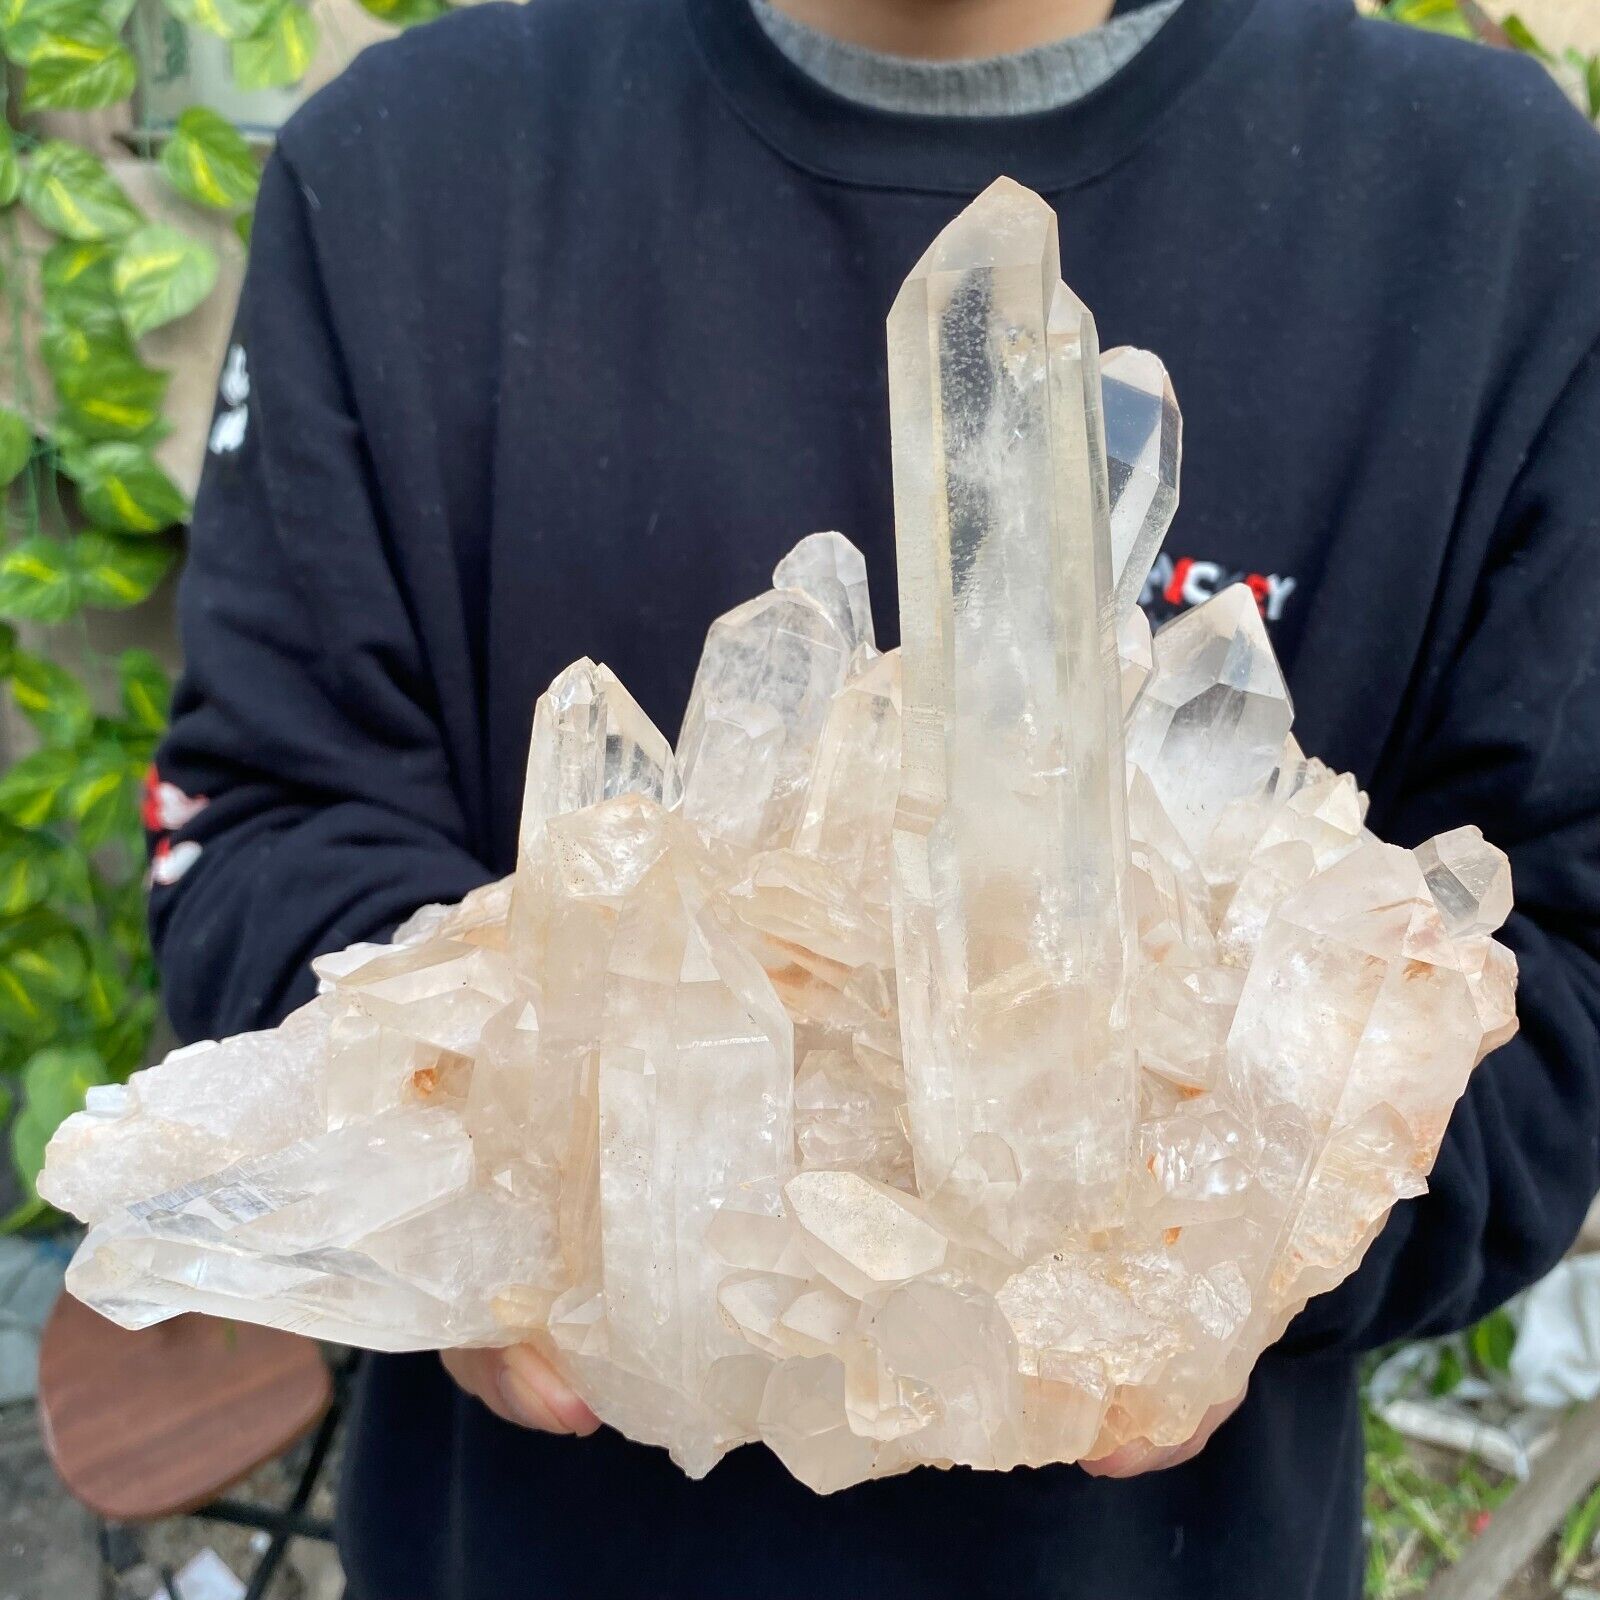 4lb A+++Large Natural clear white Crystal Himalayan quartz cluster /mineralsls